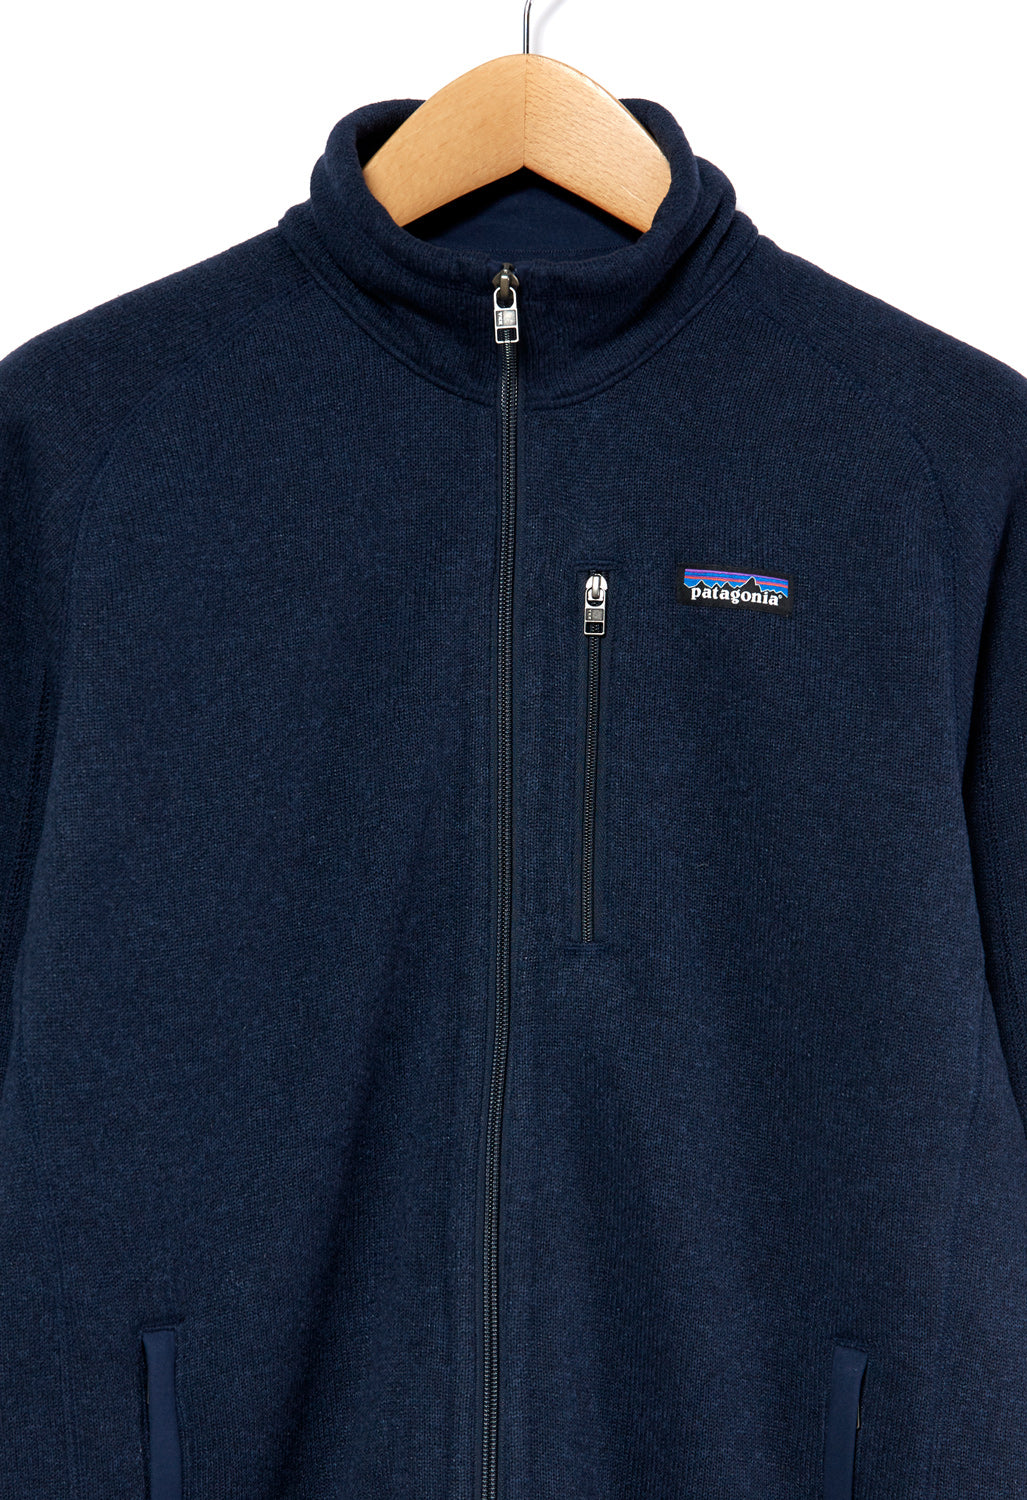 Patagonia Better Sweater Men's Jacket - New Navy – Outsiders Store UK